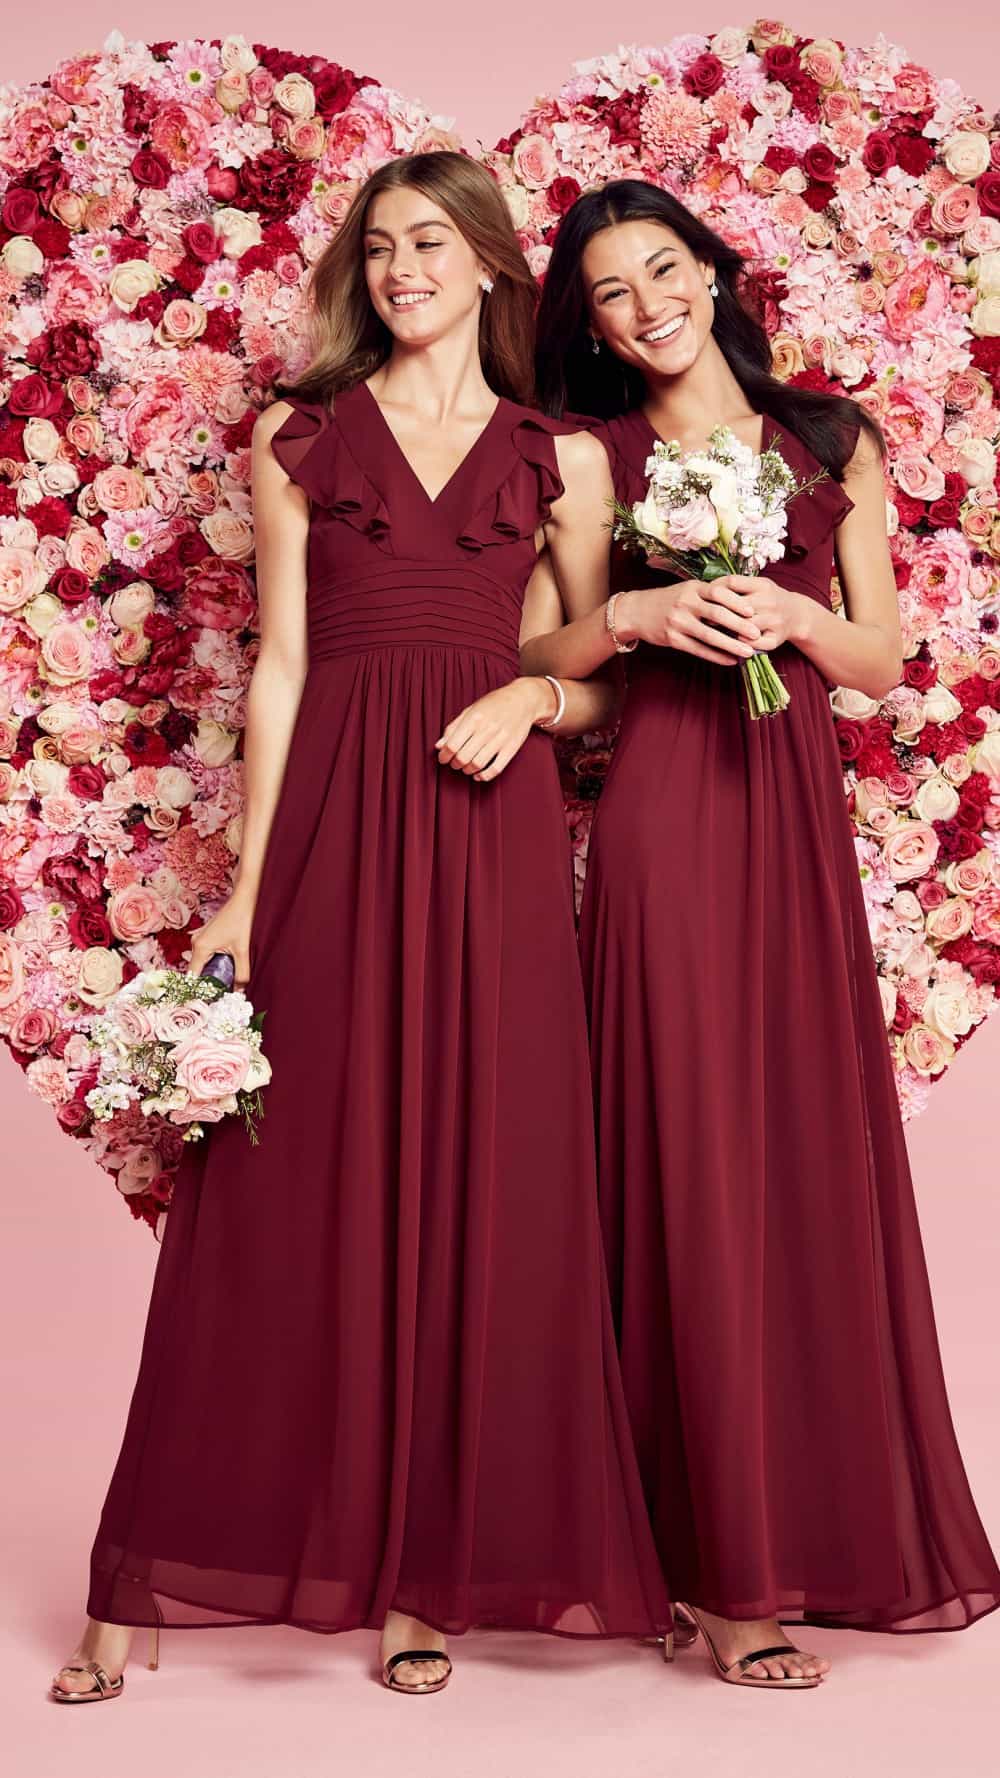 New Affordable Bridesmaid Dresses From David S Bridal Dress For The Wedding